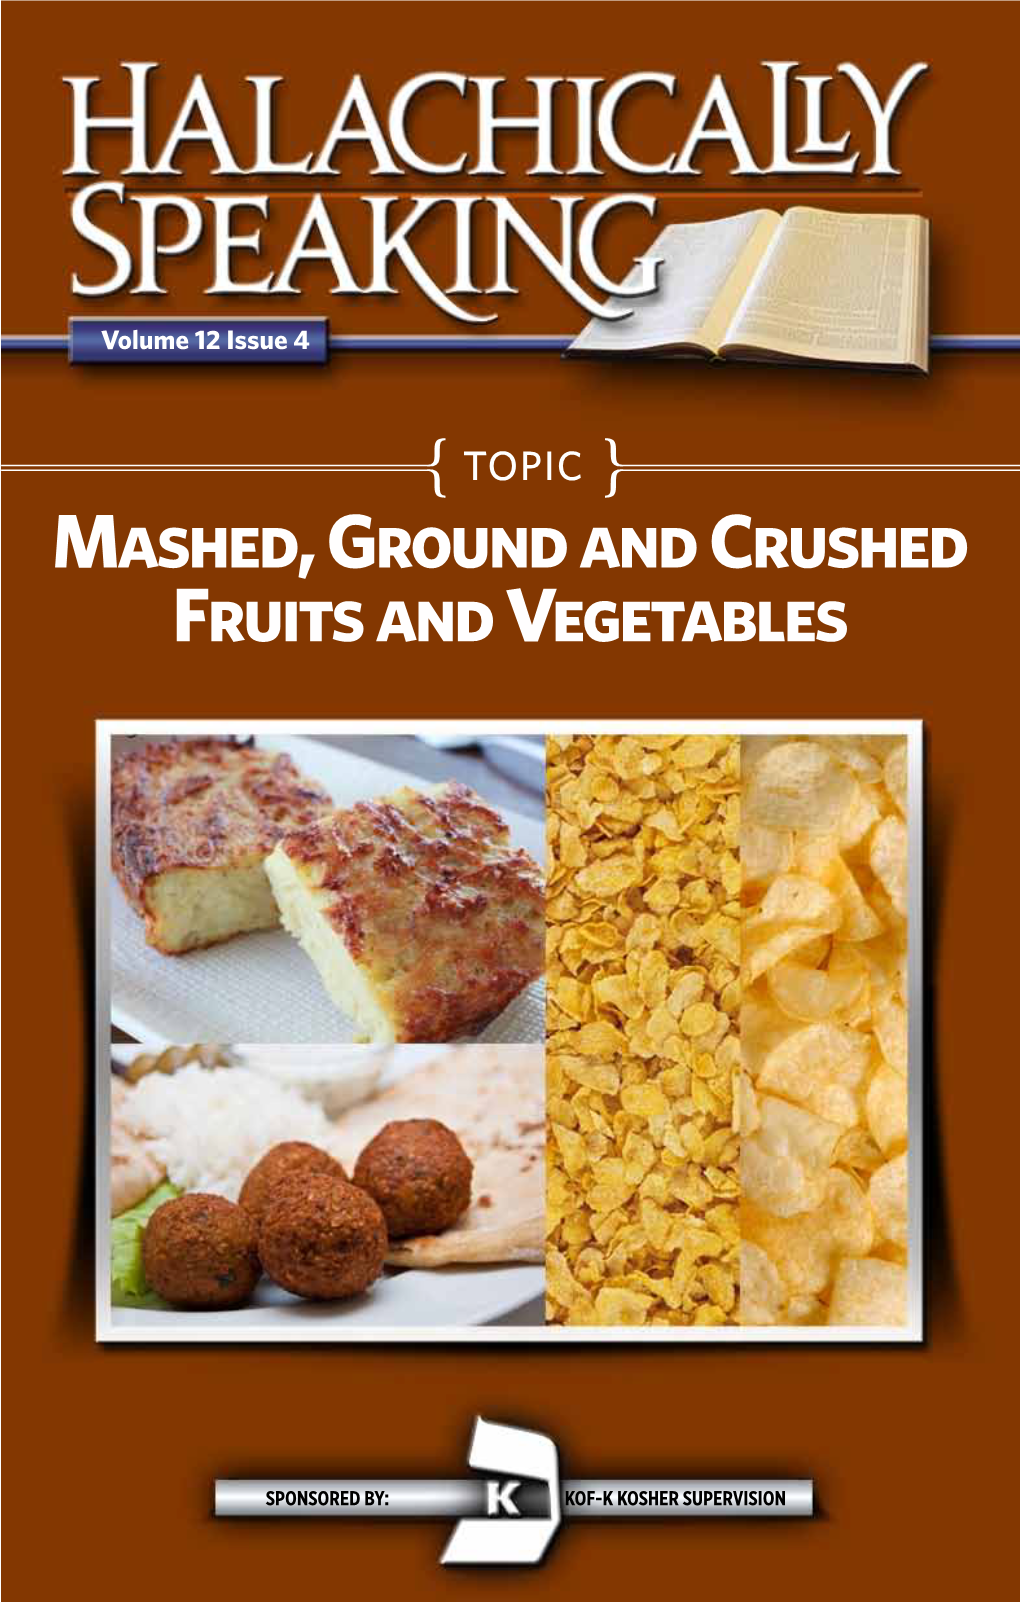 Mashed, Ground and Crushed Fruits and Vegetables